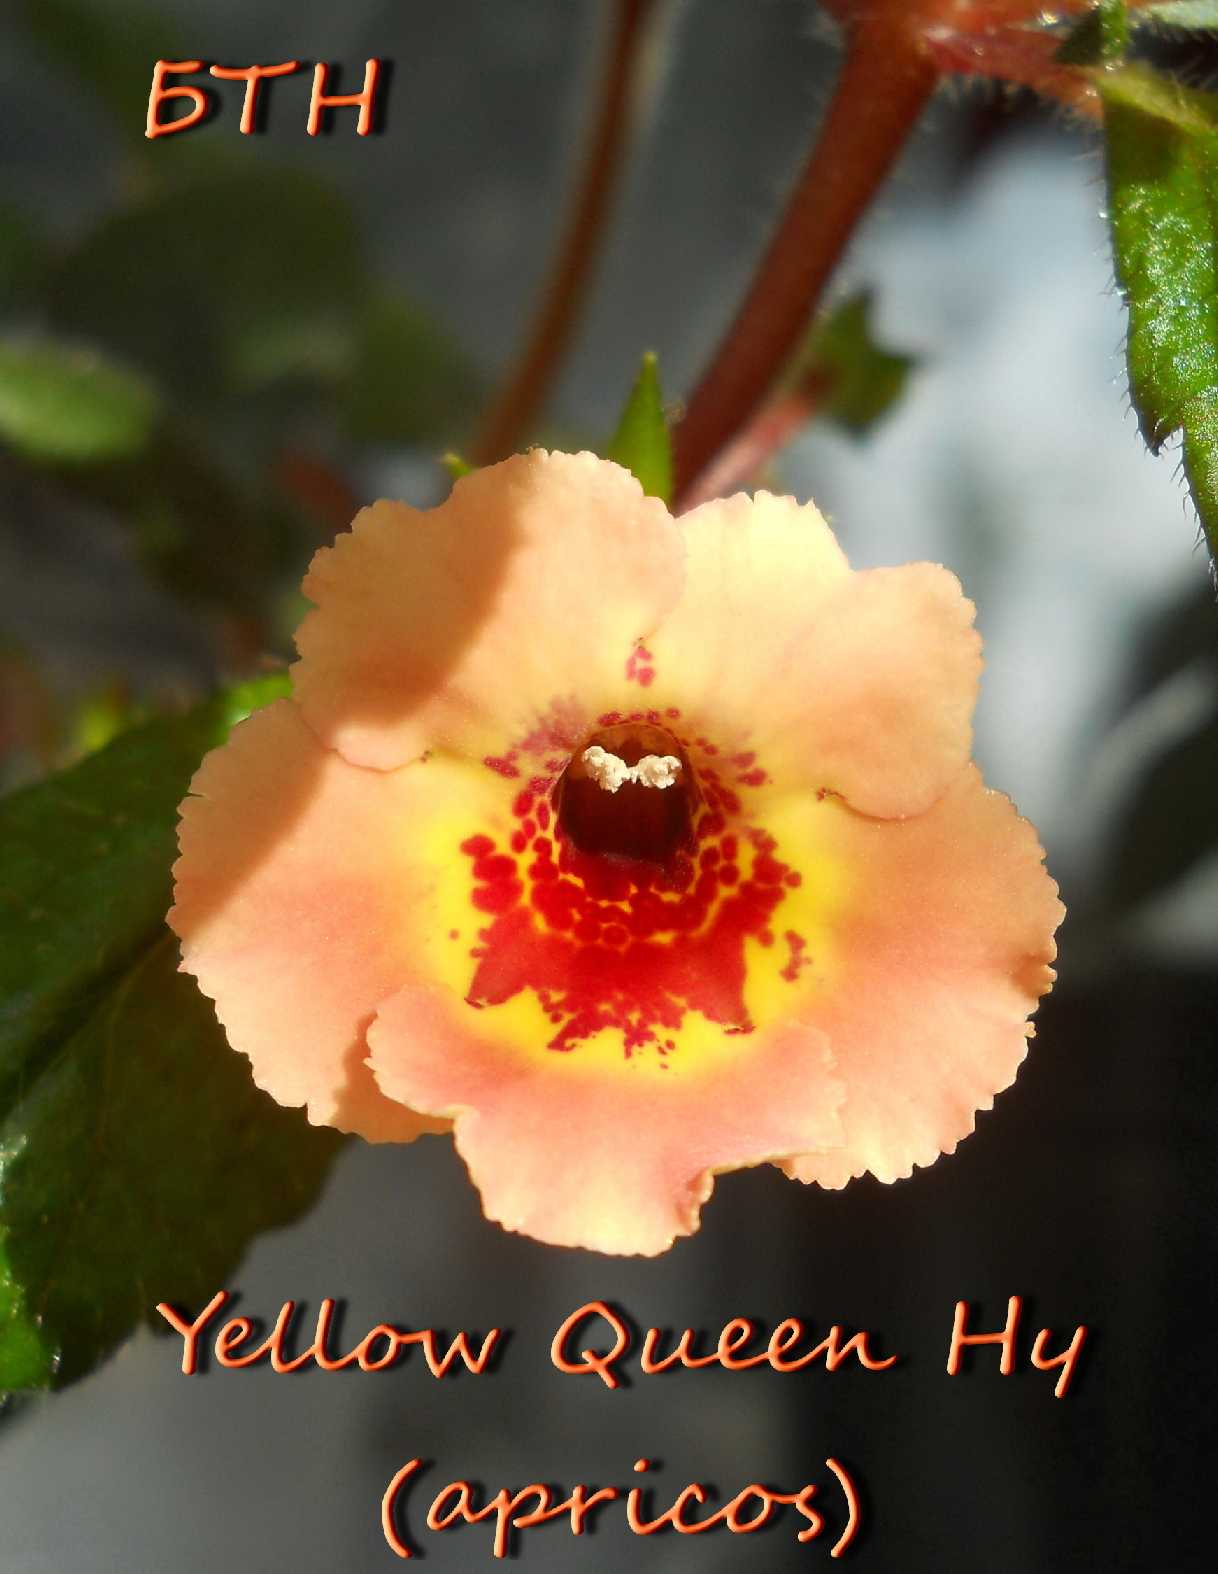  Yellow Queen Hy' (apricos) 